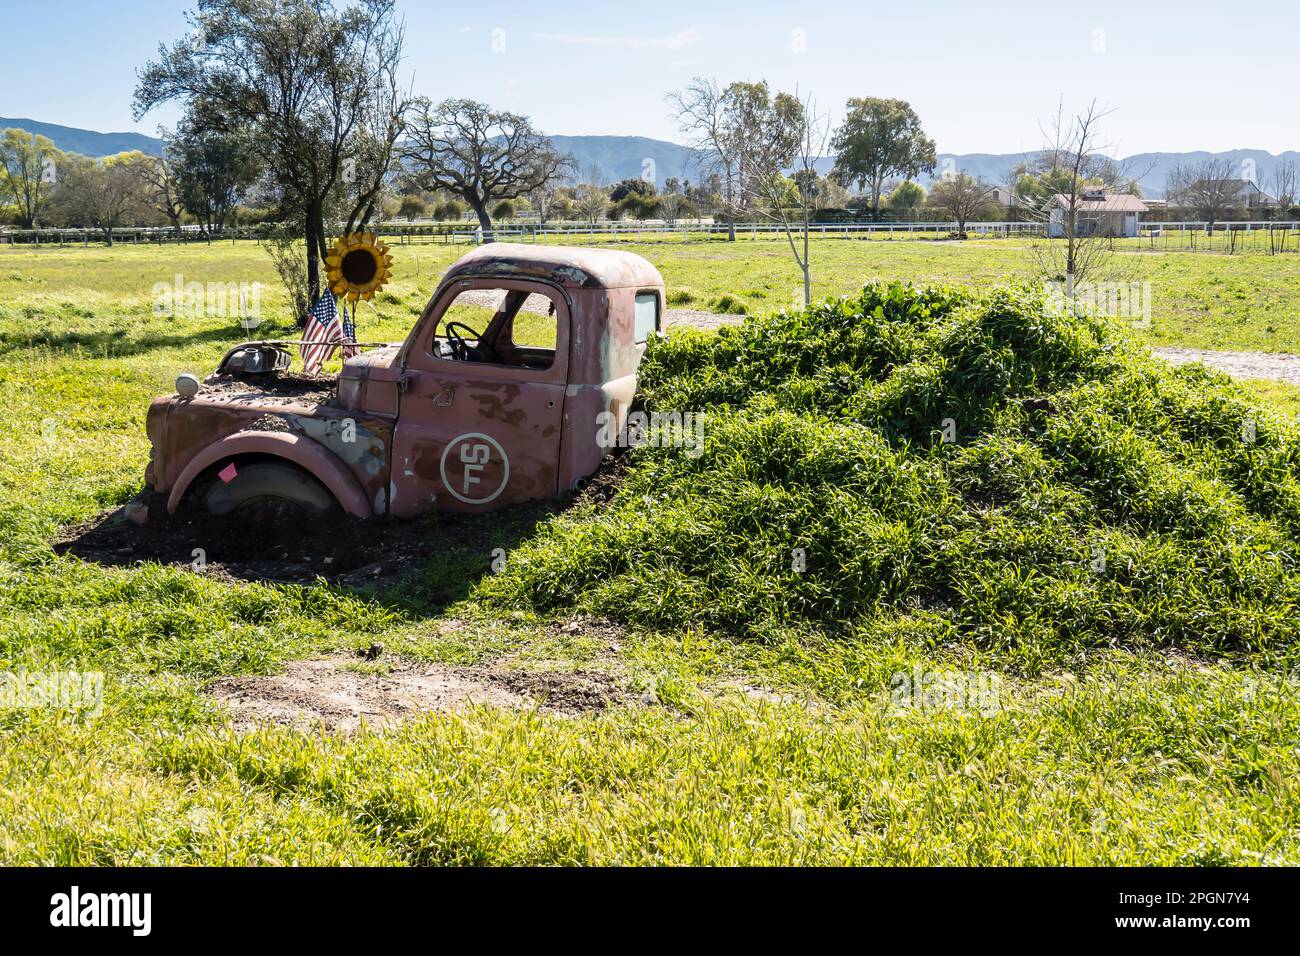 Half buried old rusted pickup truck in a mound of grass on a farm in Los Olivos, California. It could thought of as installation art. Stock Photo